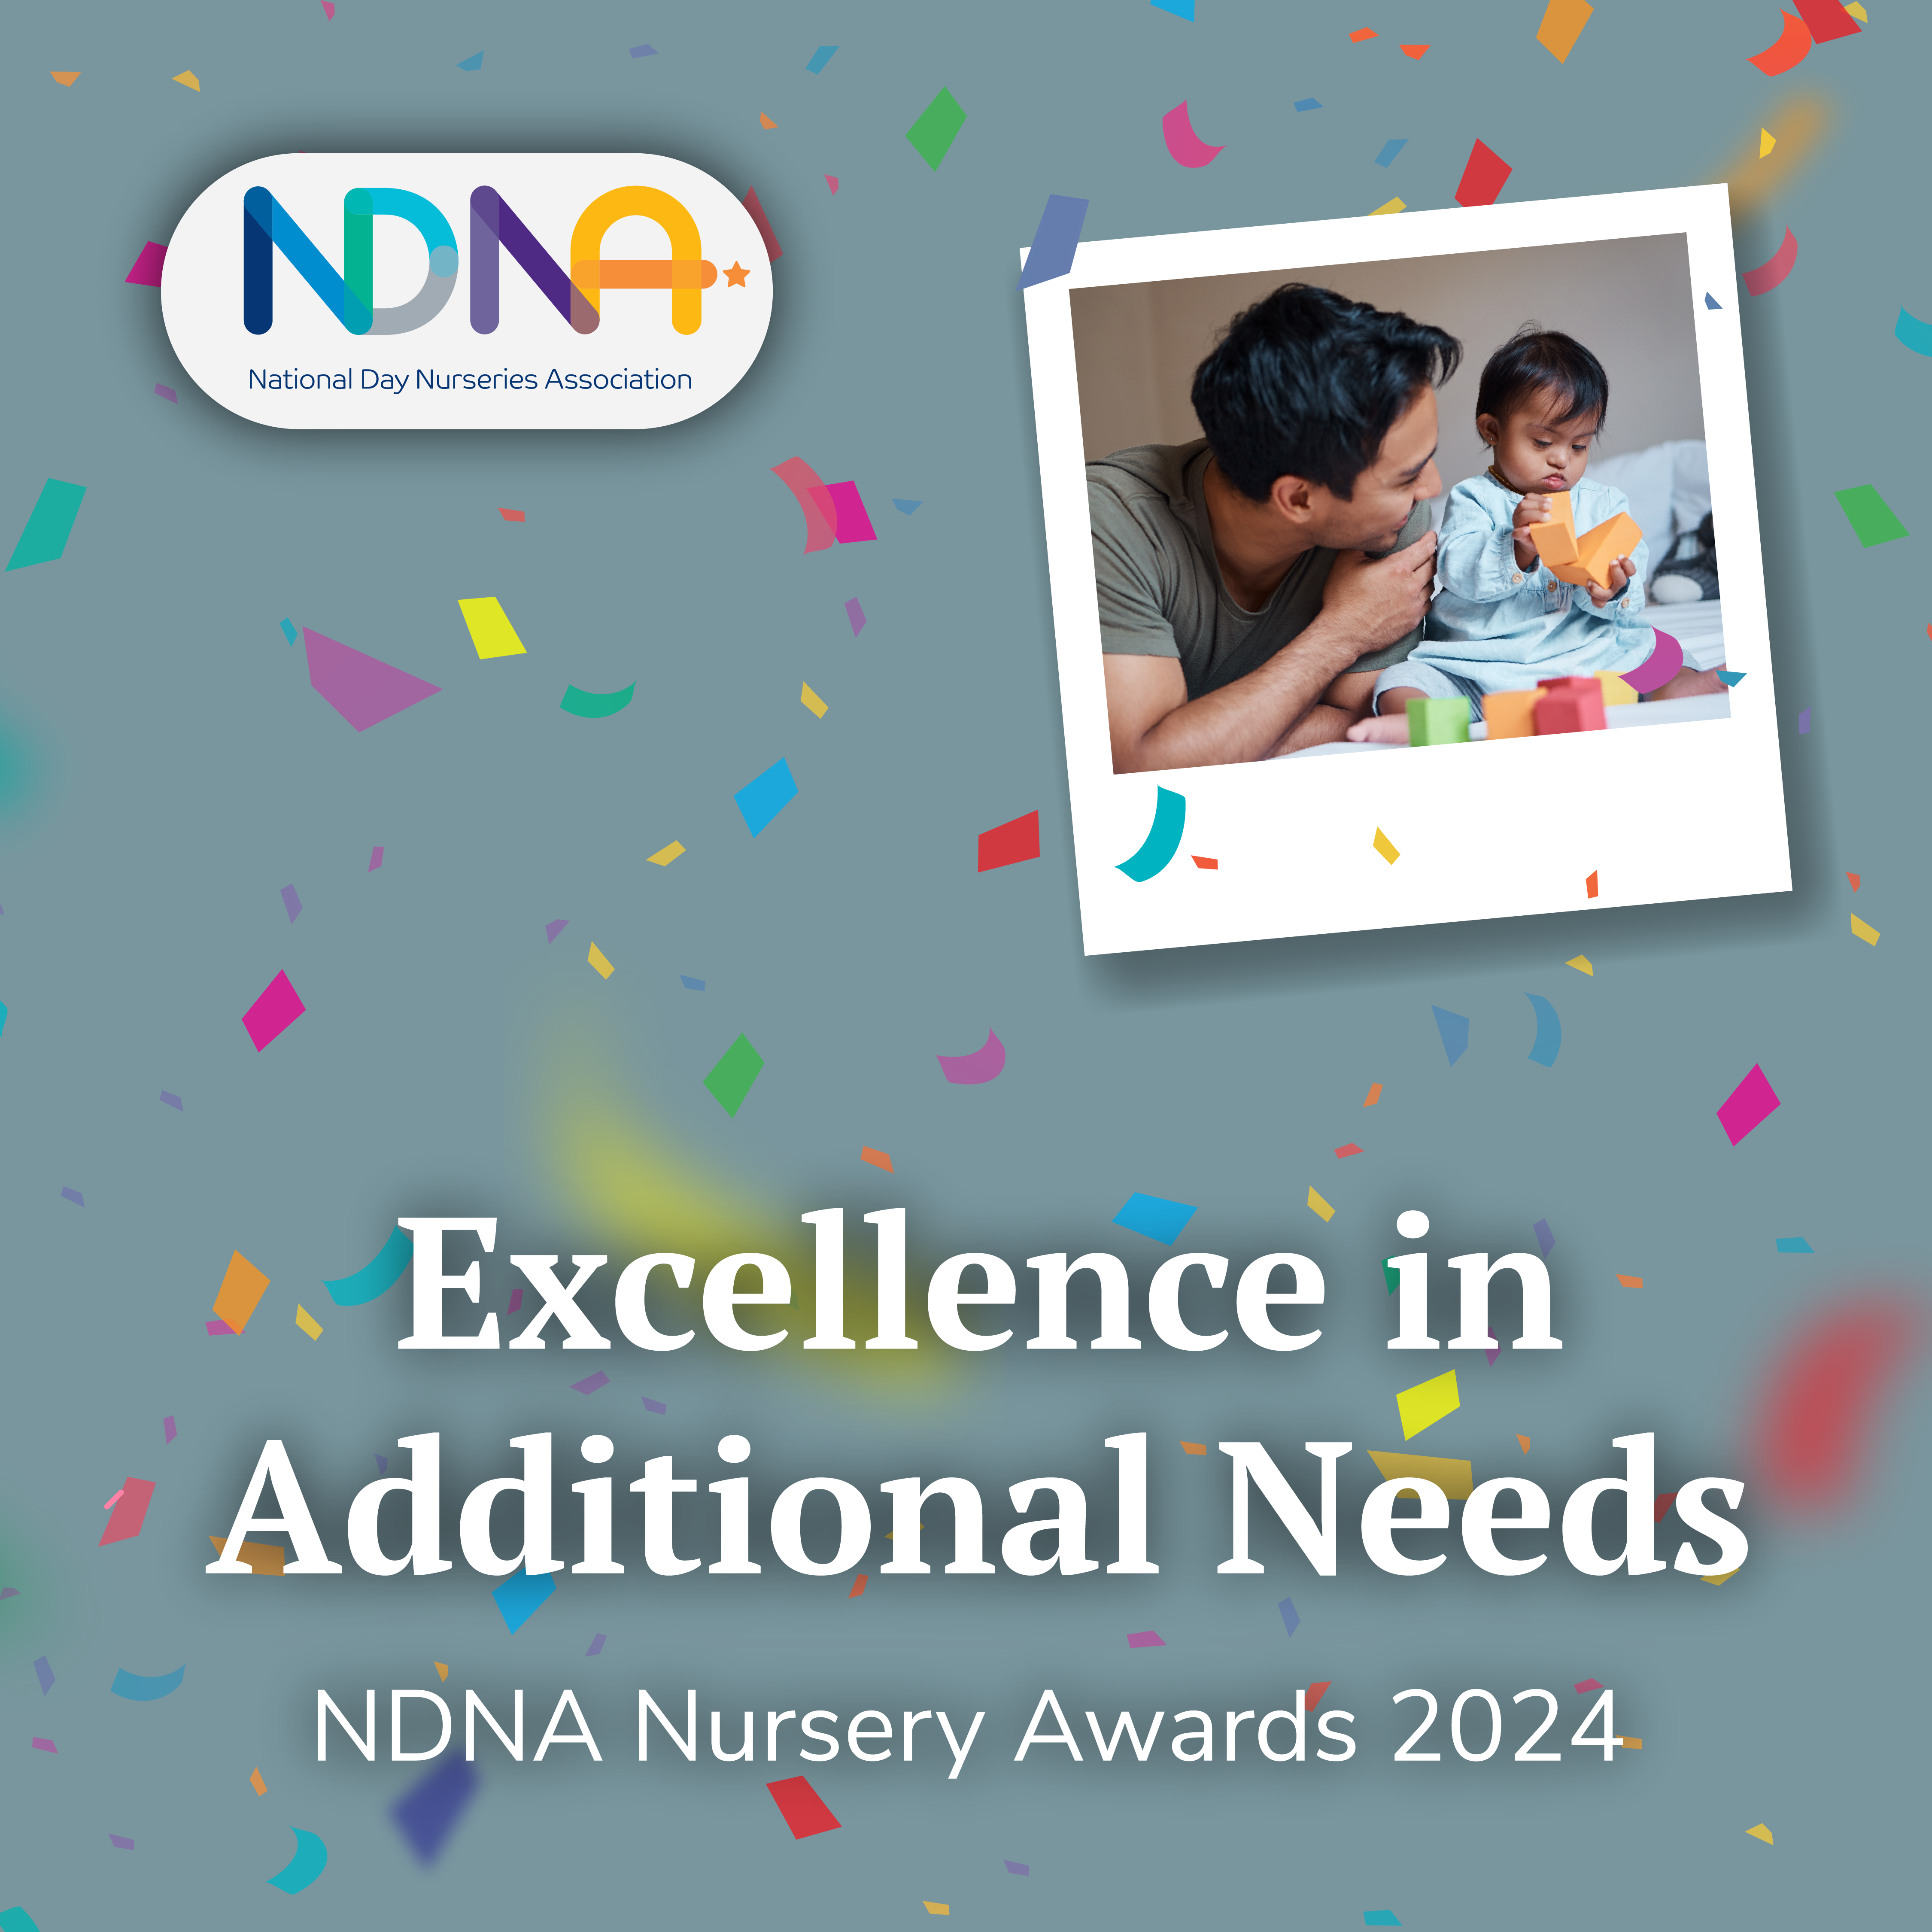 NEW! Excellence in Additional Needs Award